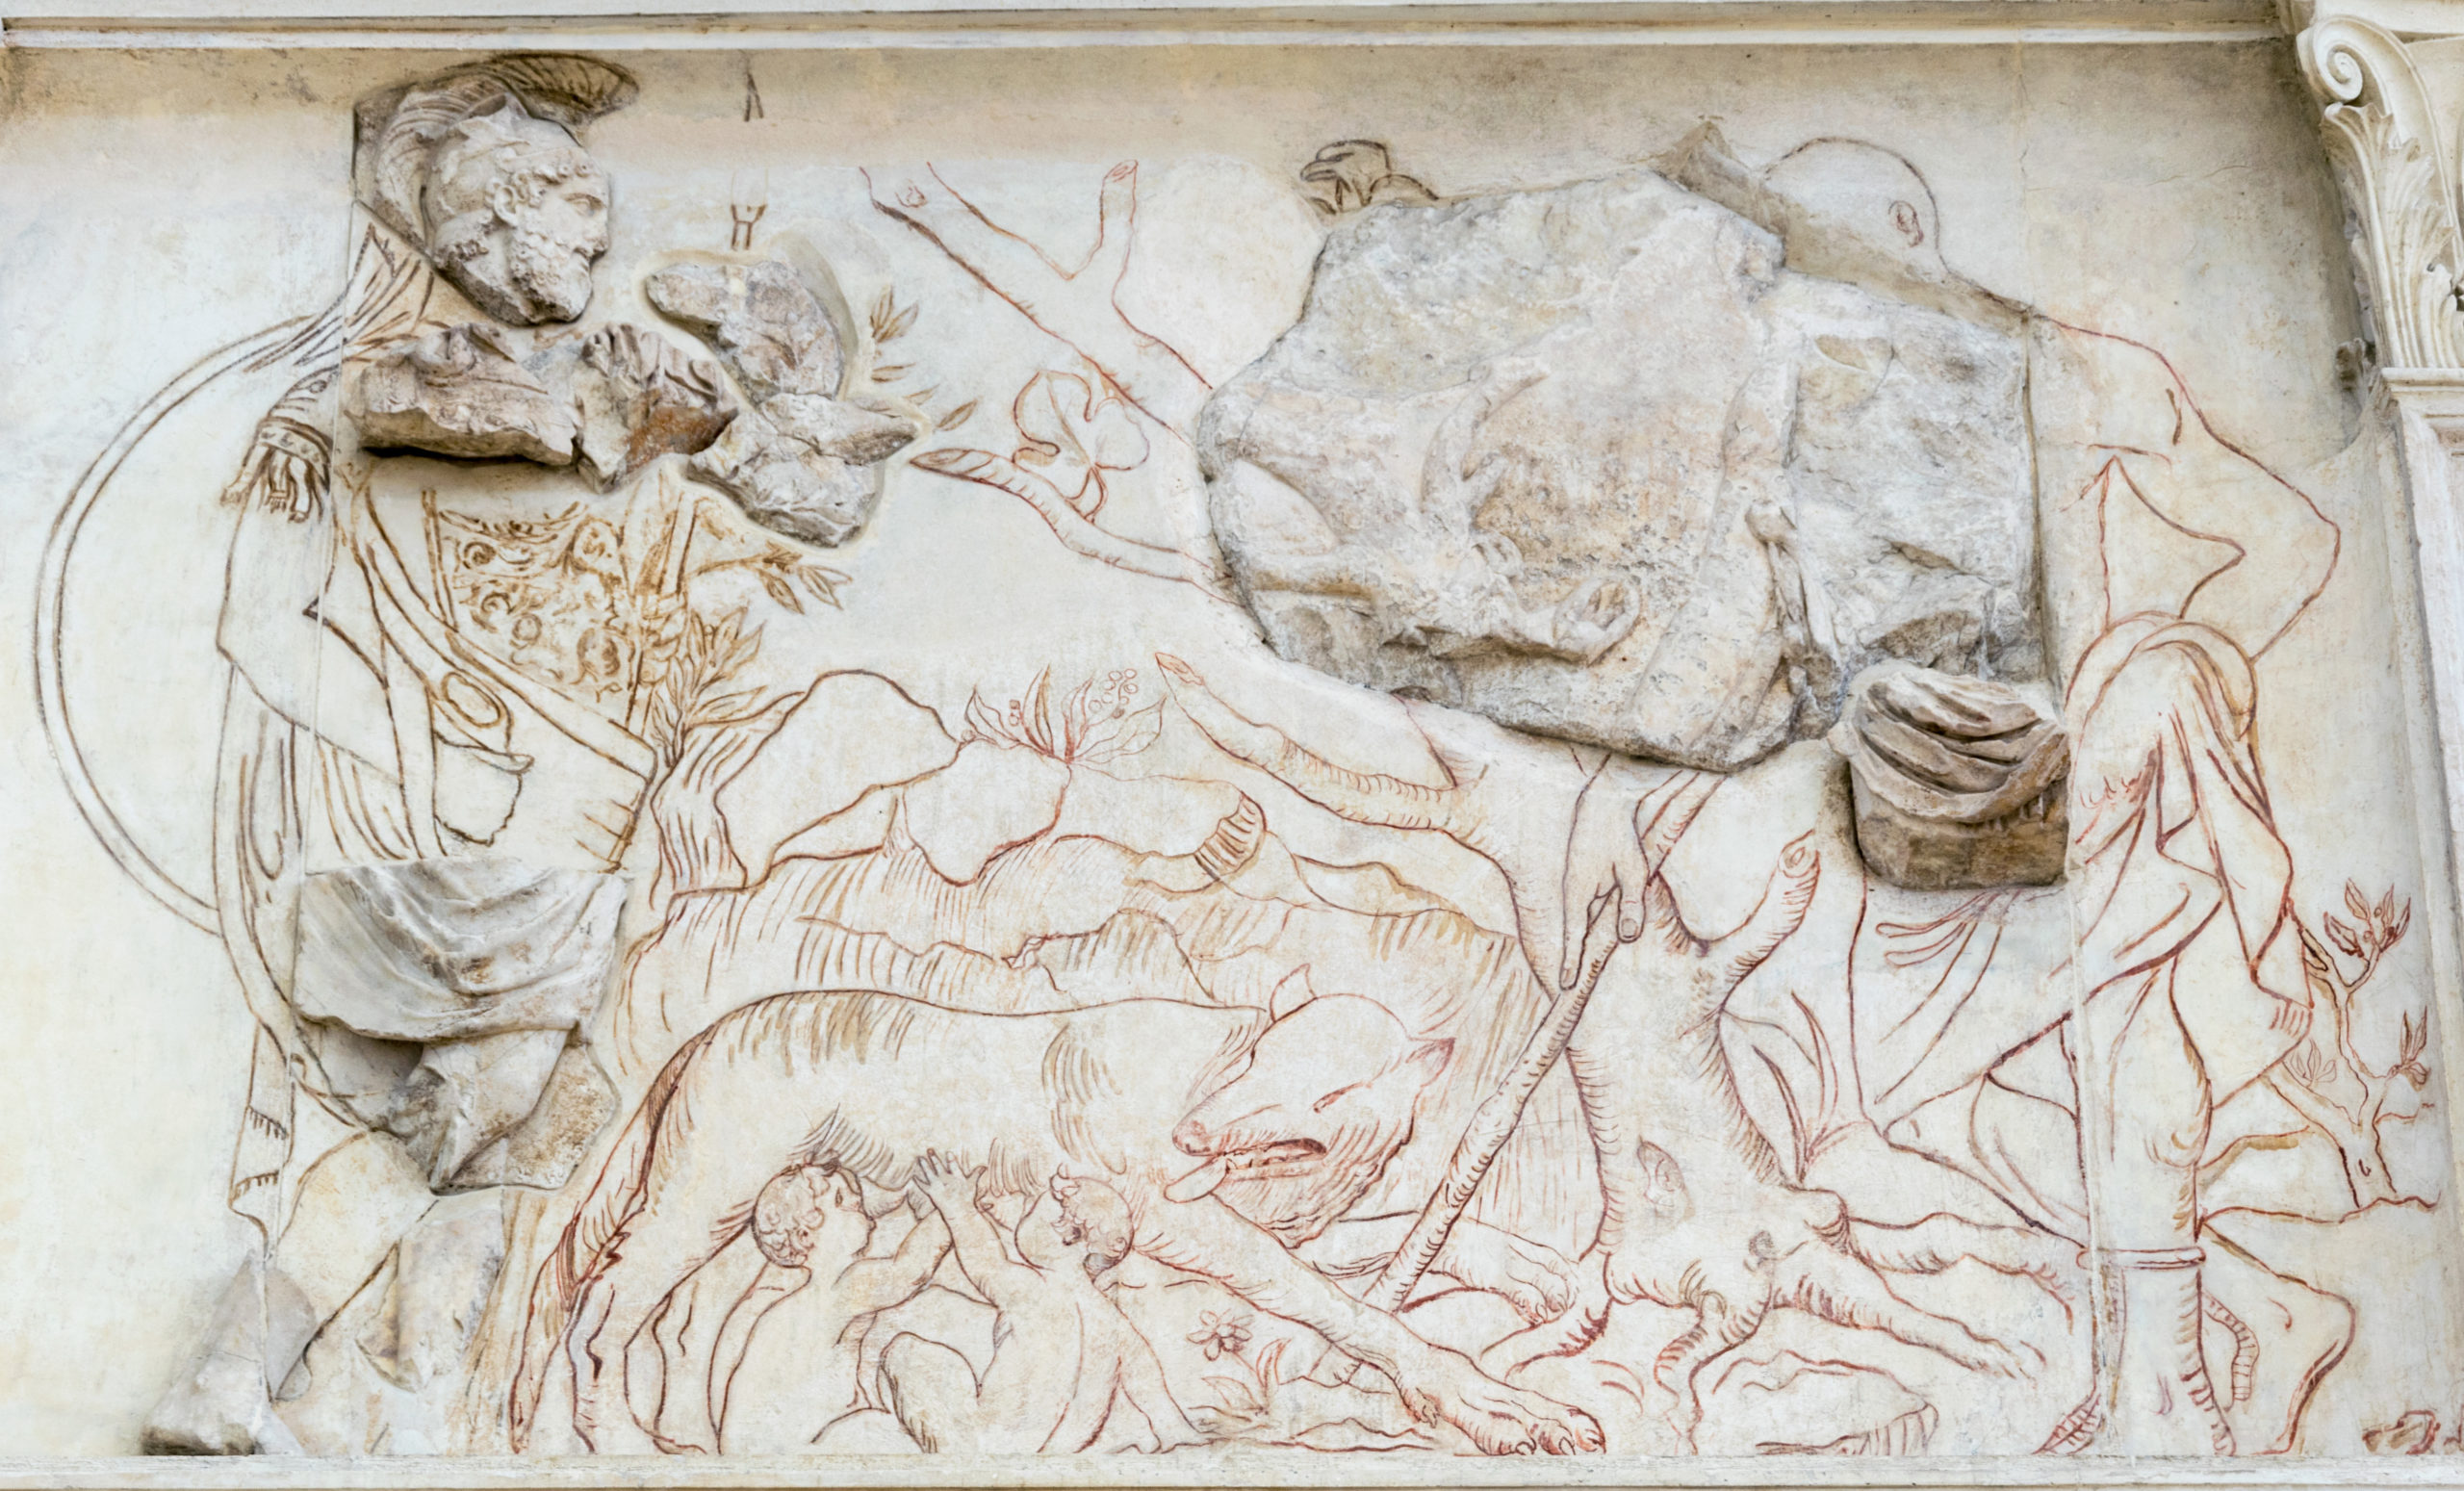 On the left stands Mars in a plumed helm and armour. To the right stands the shepherd Faustulus by a tree. Between them is a reconstructed image of the children Romulus and Remus being nursed by the wolf Lupa.